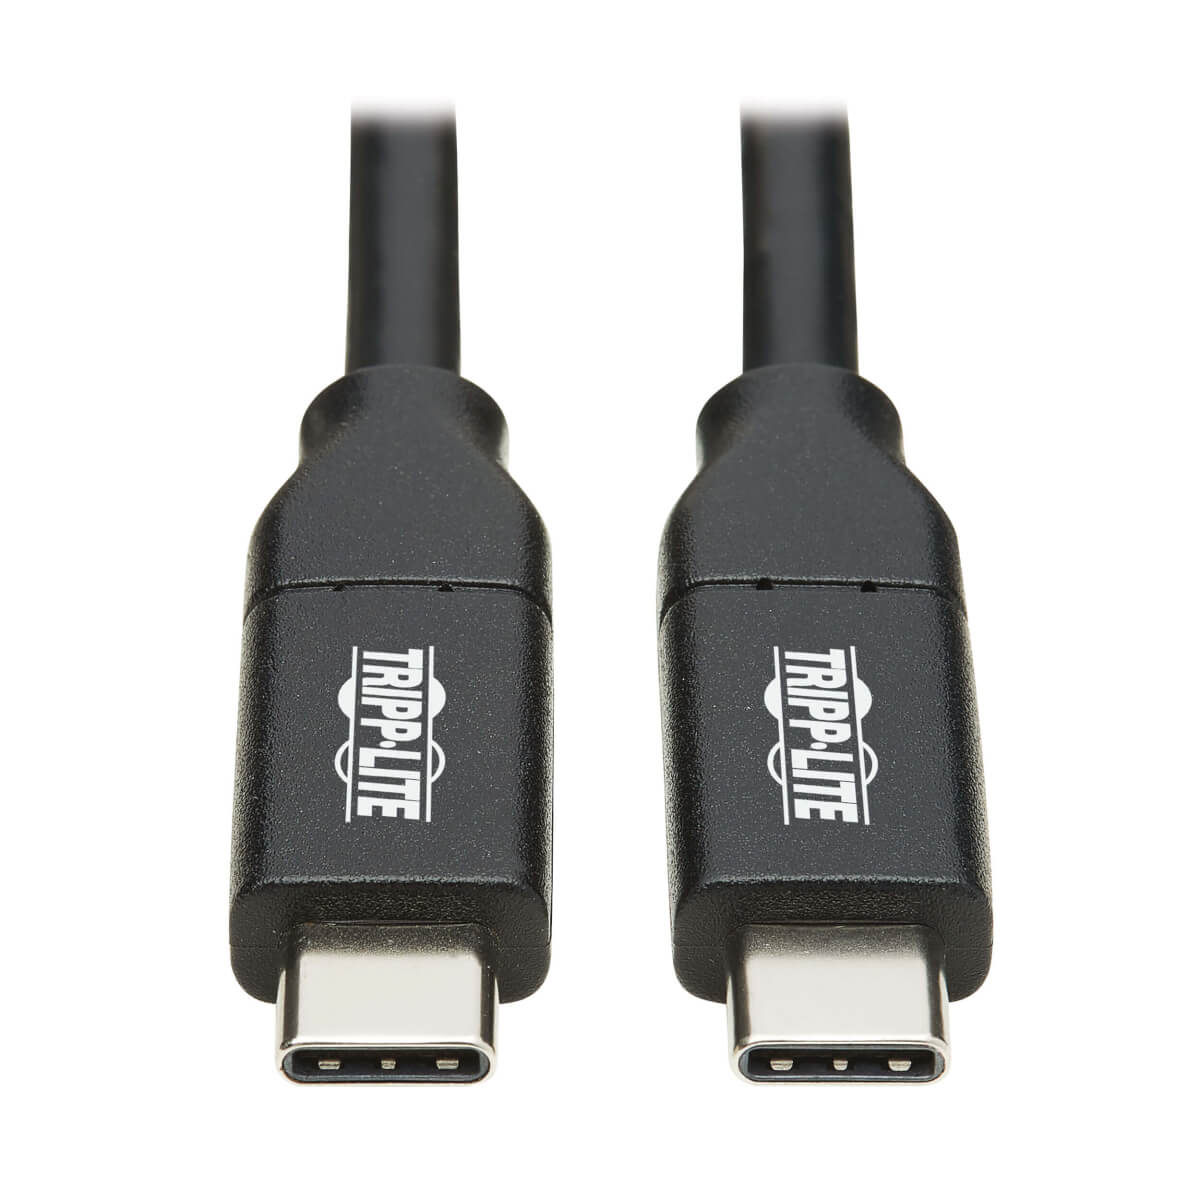 Tripp Lite USB Type C to USB C Cable USB 2.0 5A Rating USB-IF Cert M/M 2M, Black - image 1 of 5